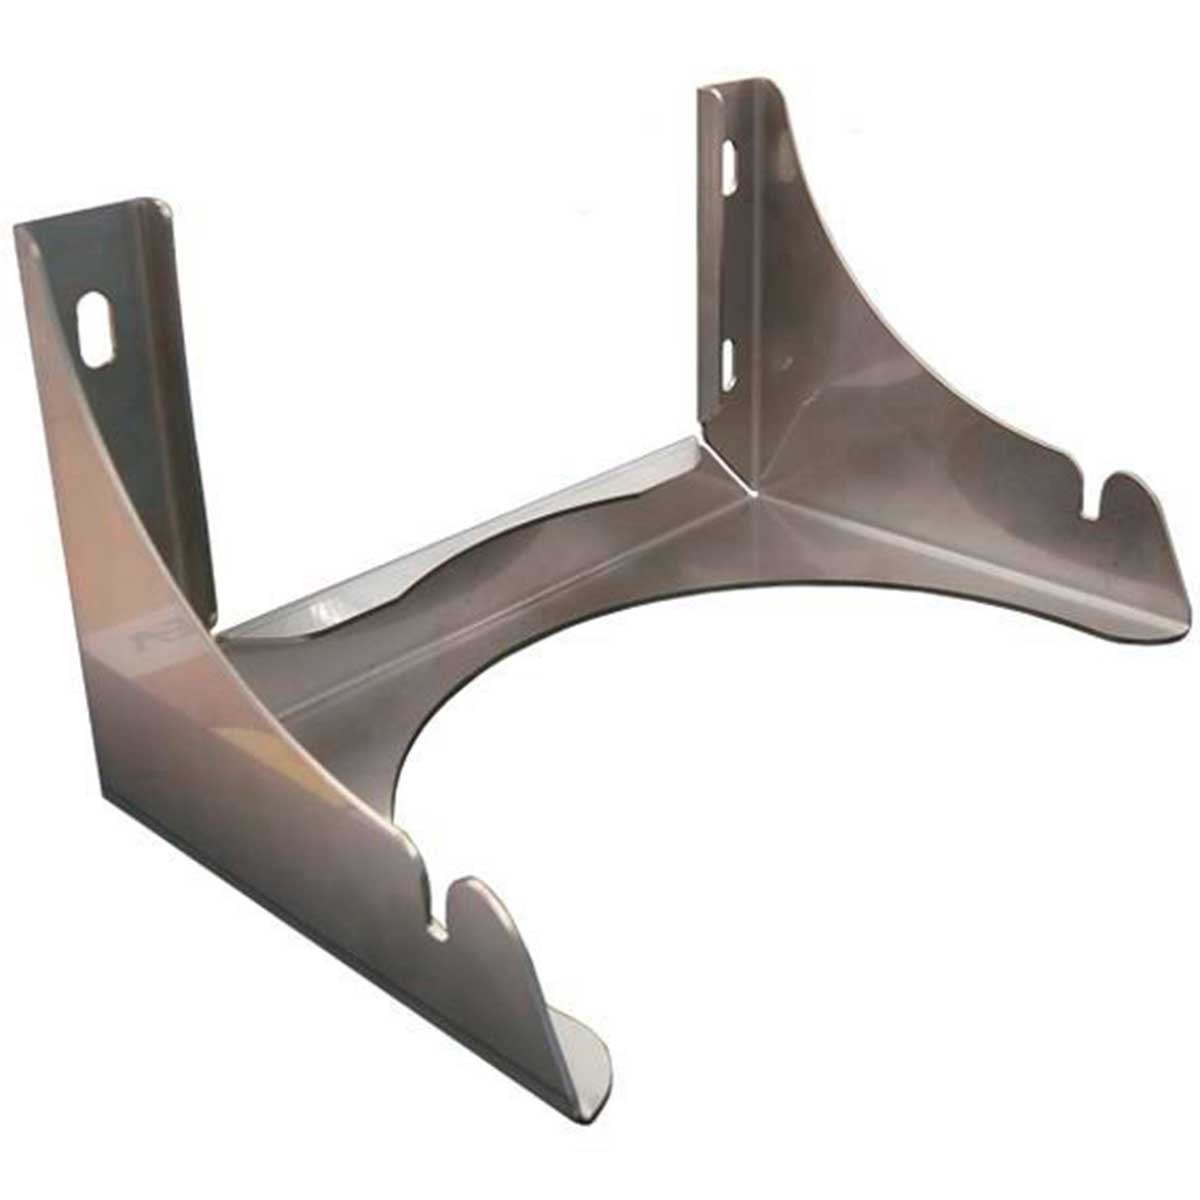 Bracket for udder cloth bucket made of stainless steel